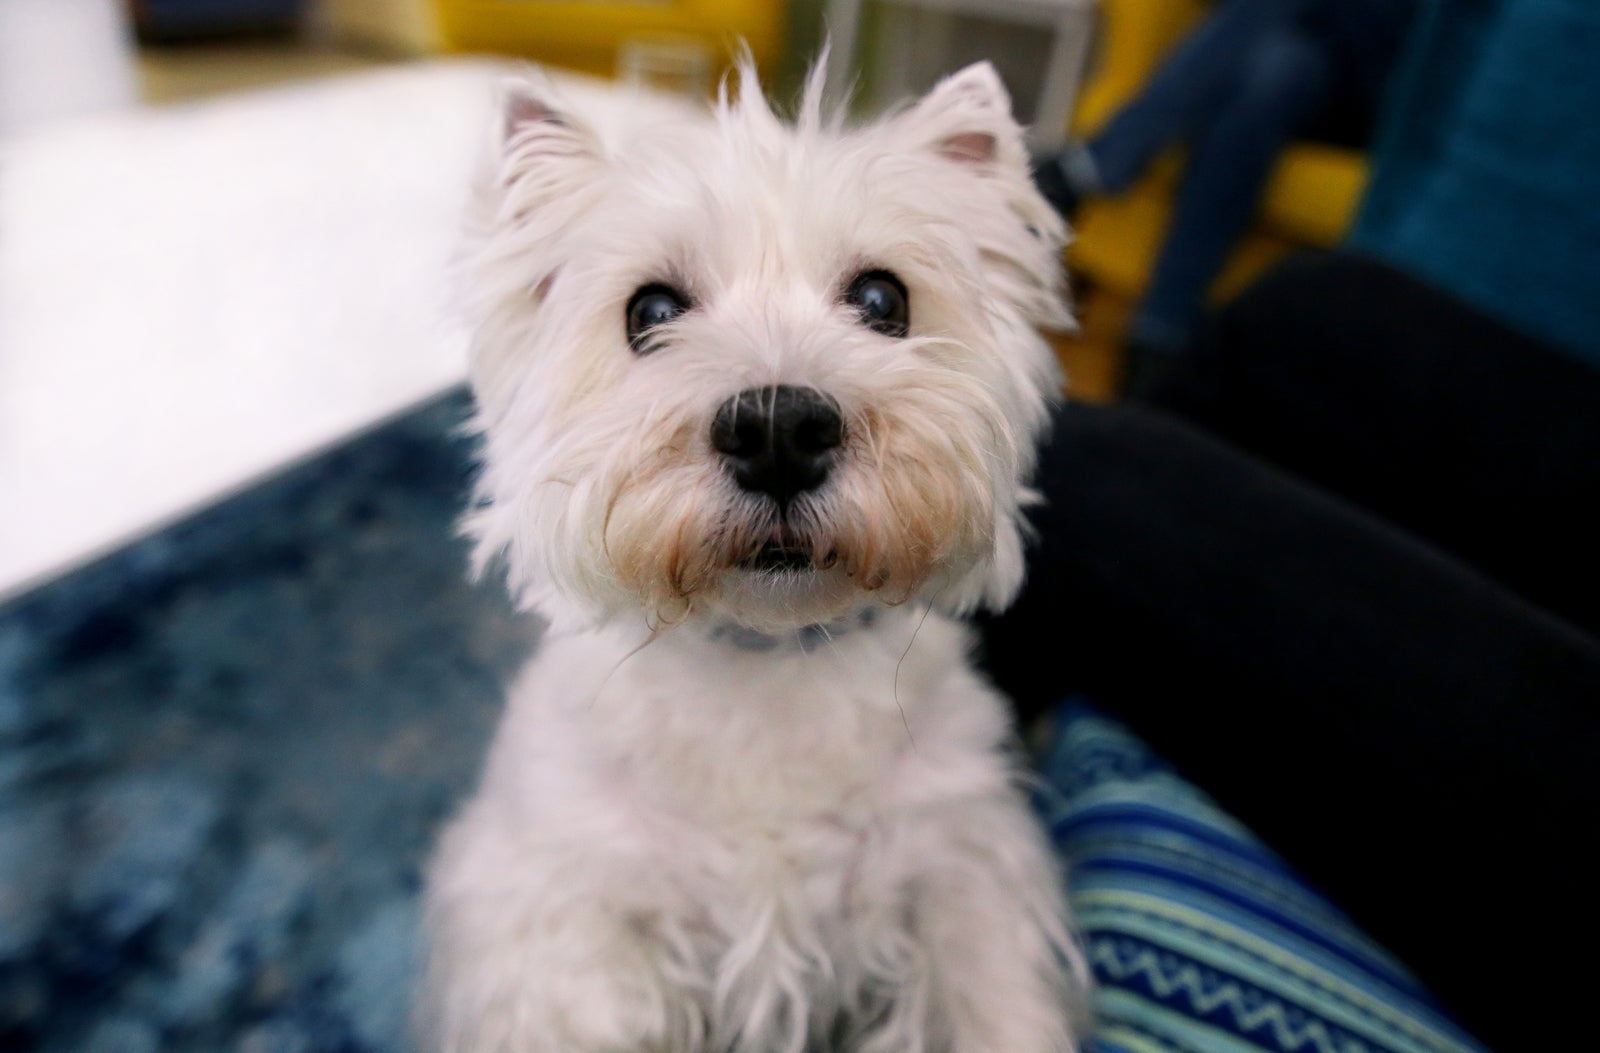 Dog photo shoot at home. Pet portrait of cute West Highland White Terrier dog enjoying and resting in living room indoor. Happy Colin Westie Terrier a very good looking dog posing in front of camera.